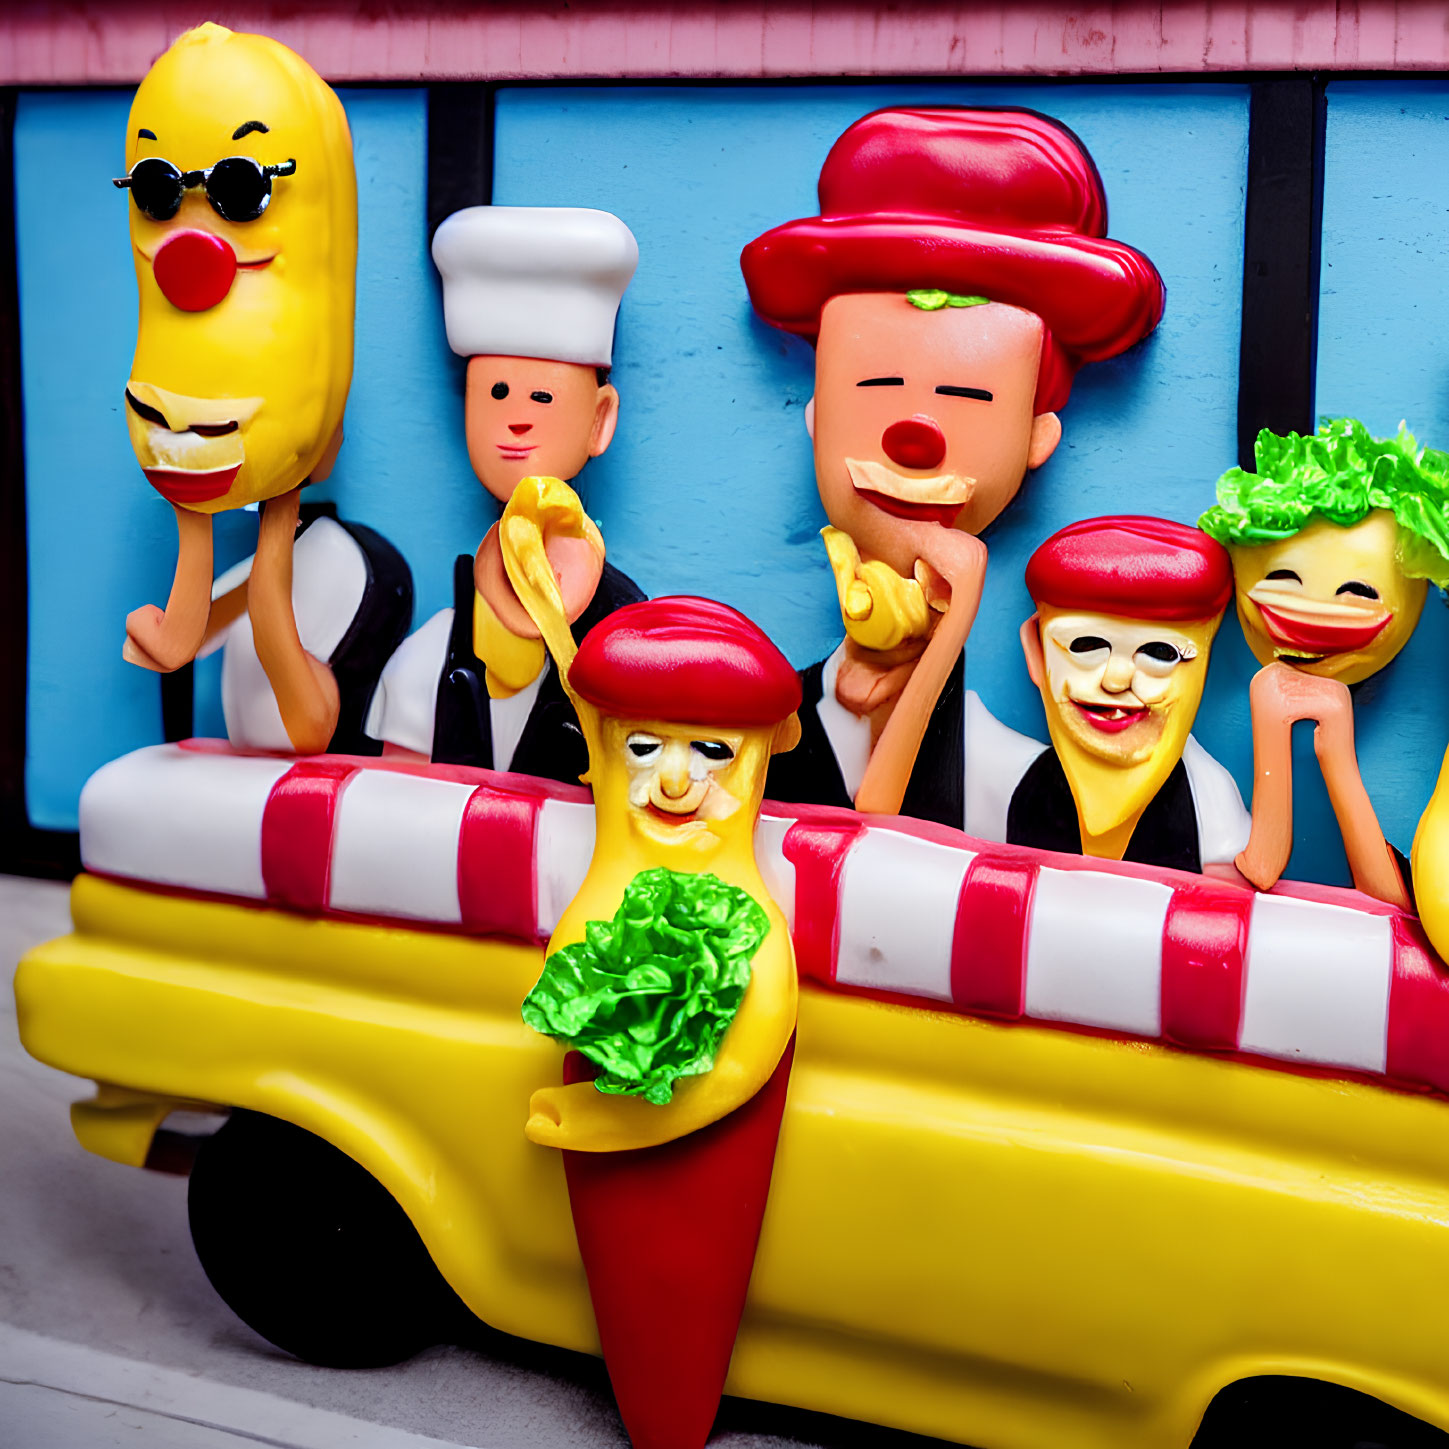 Colorful anthropomorphic fast food figurines in yellow toy car